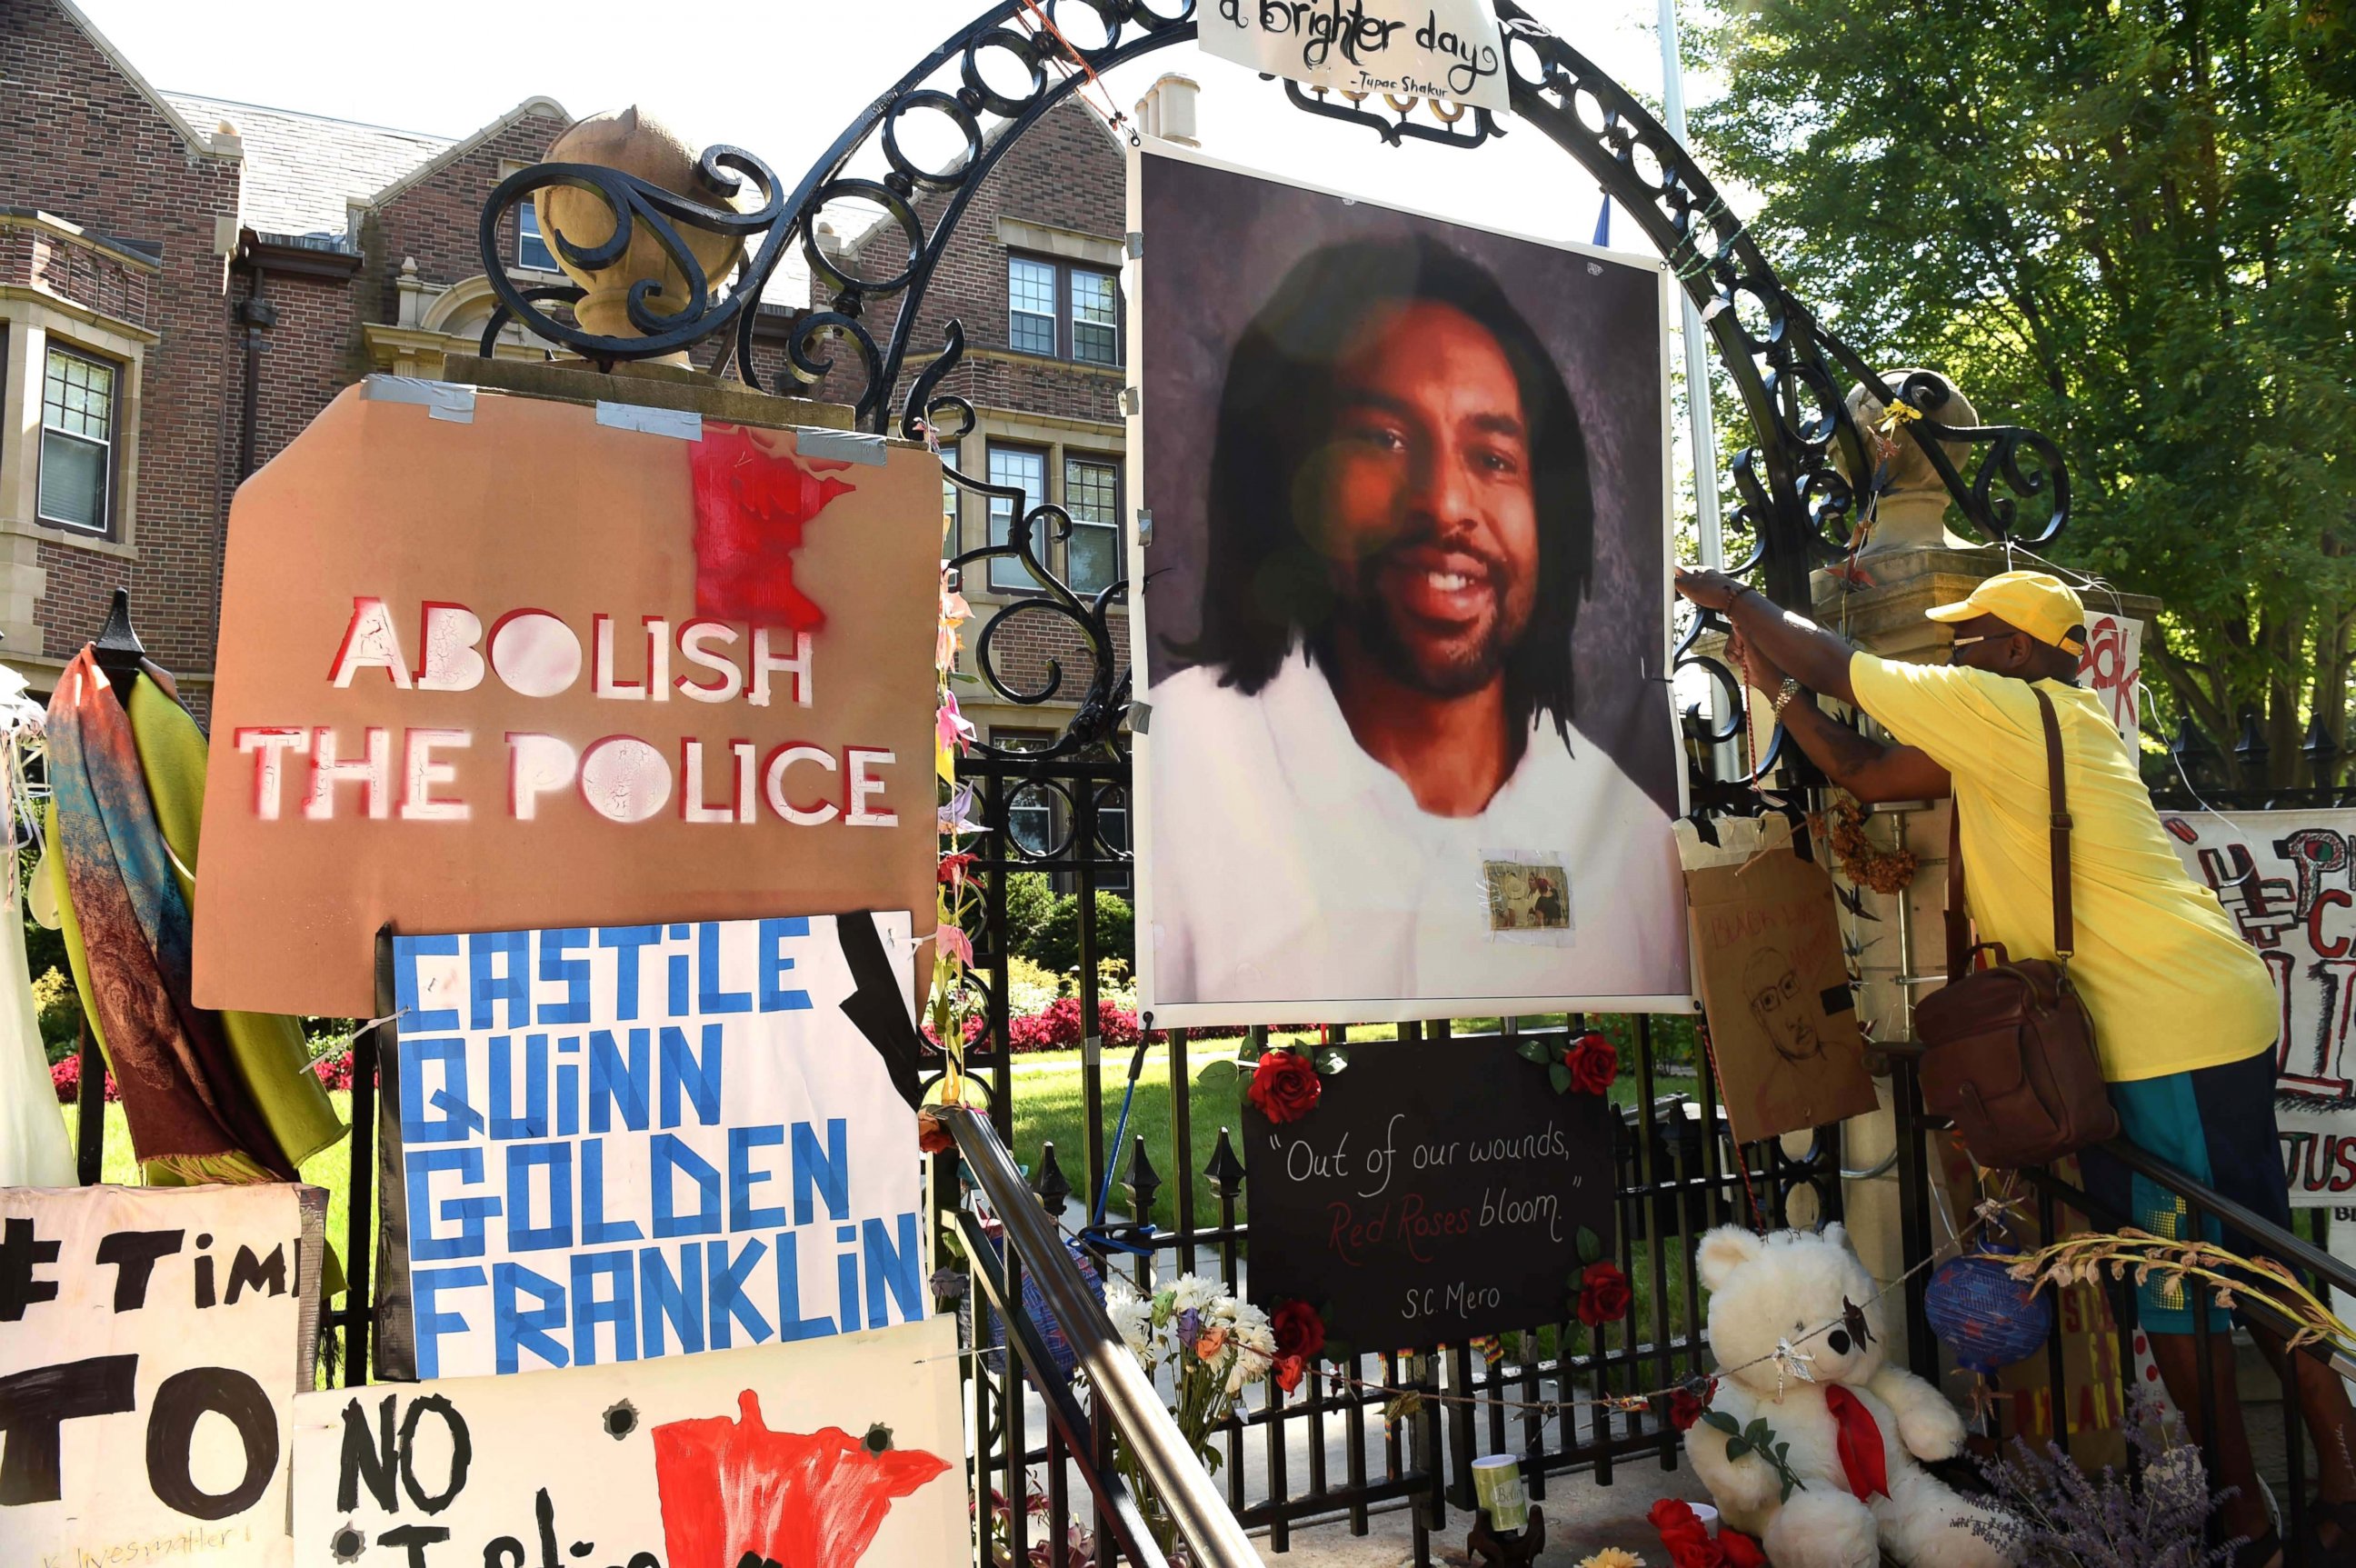 PHOTO: King Demetrius Pendleton hangs a sign on the gate of the Governor's Residence in St. Paul, Minn., as protesters demonstrate against the July 6 shooting death of Philando Castile in Falcon Heights, Michigan, July 24, 2016 .